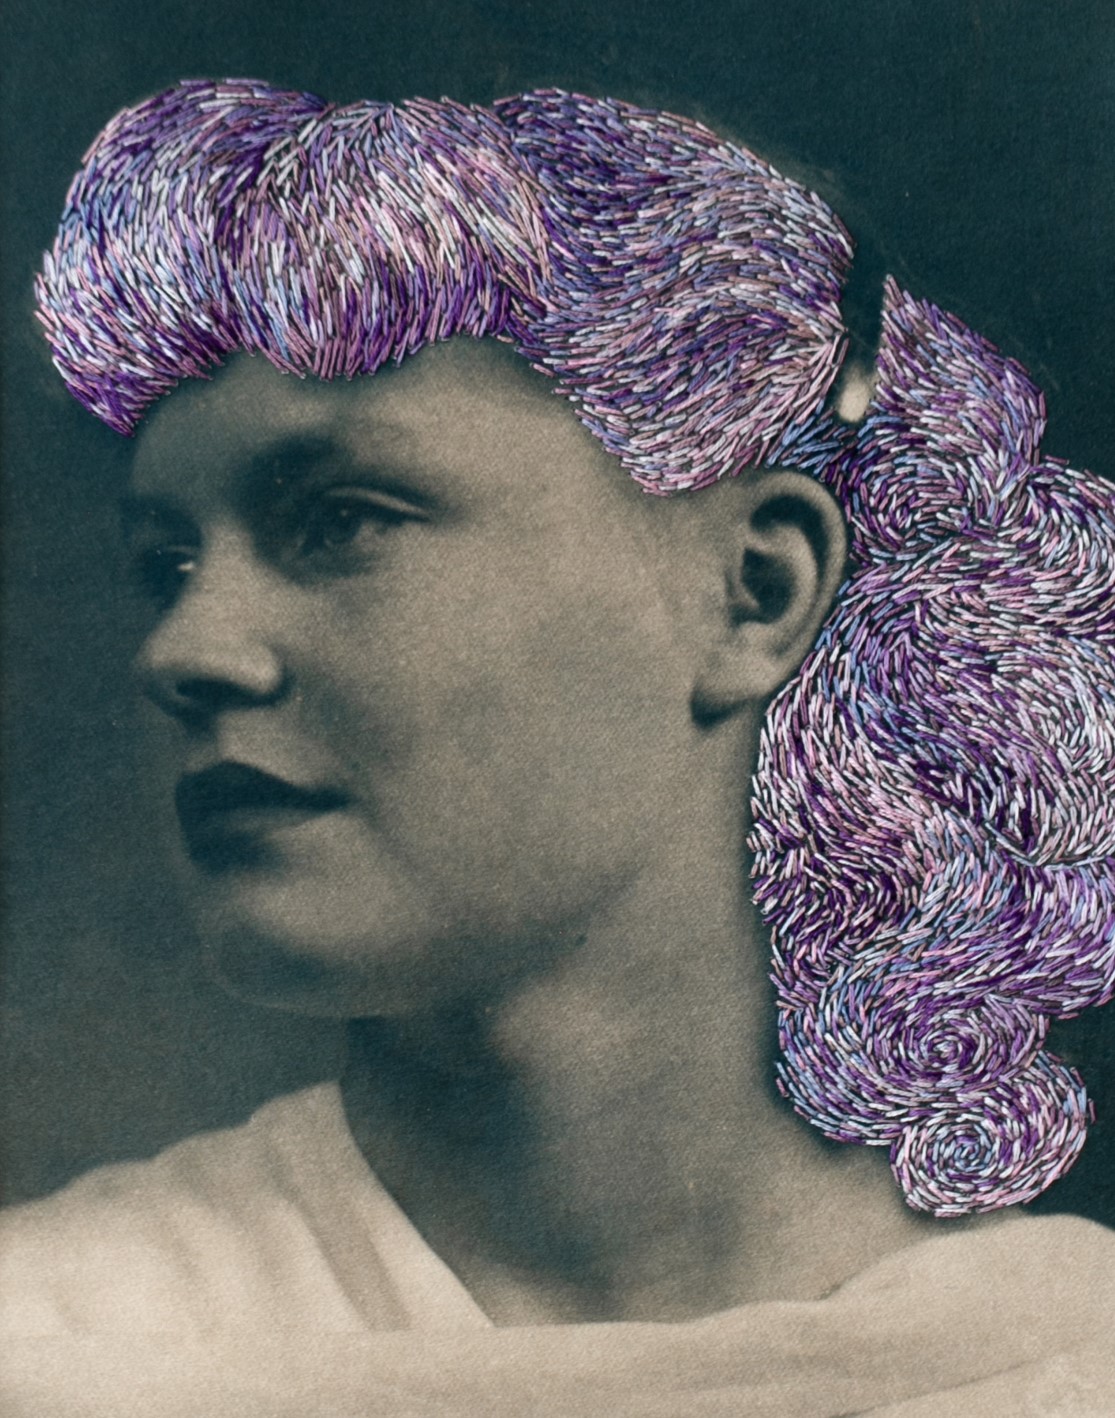 Embroidered Vintage Portraits By Han Cao (2)